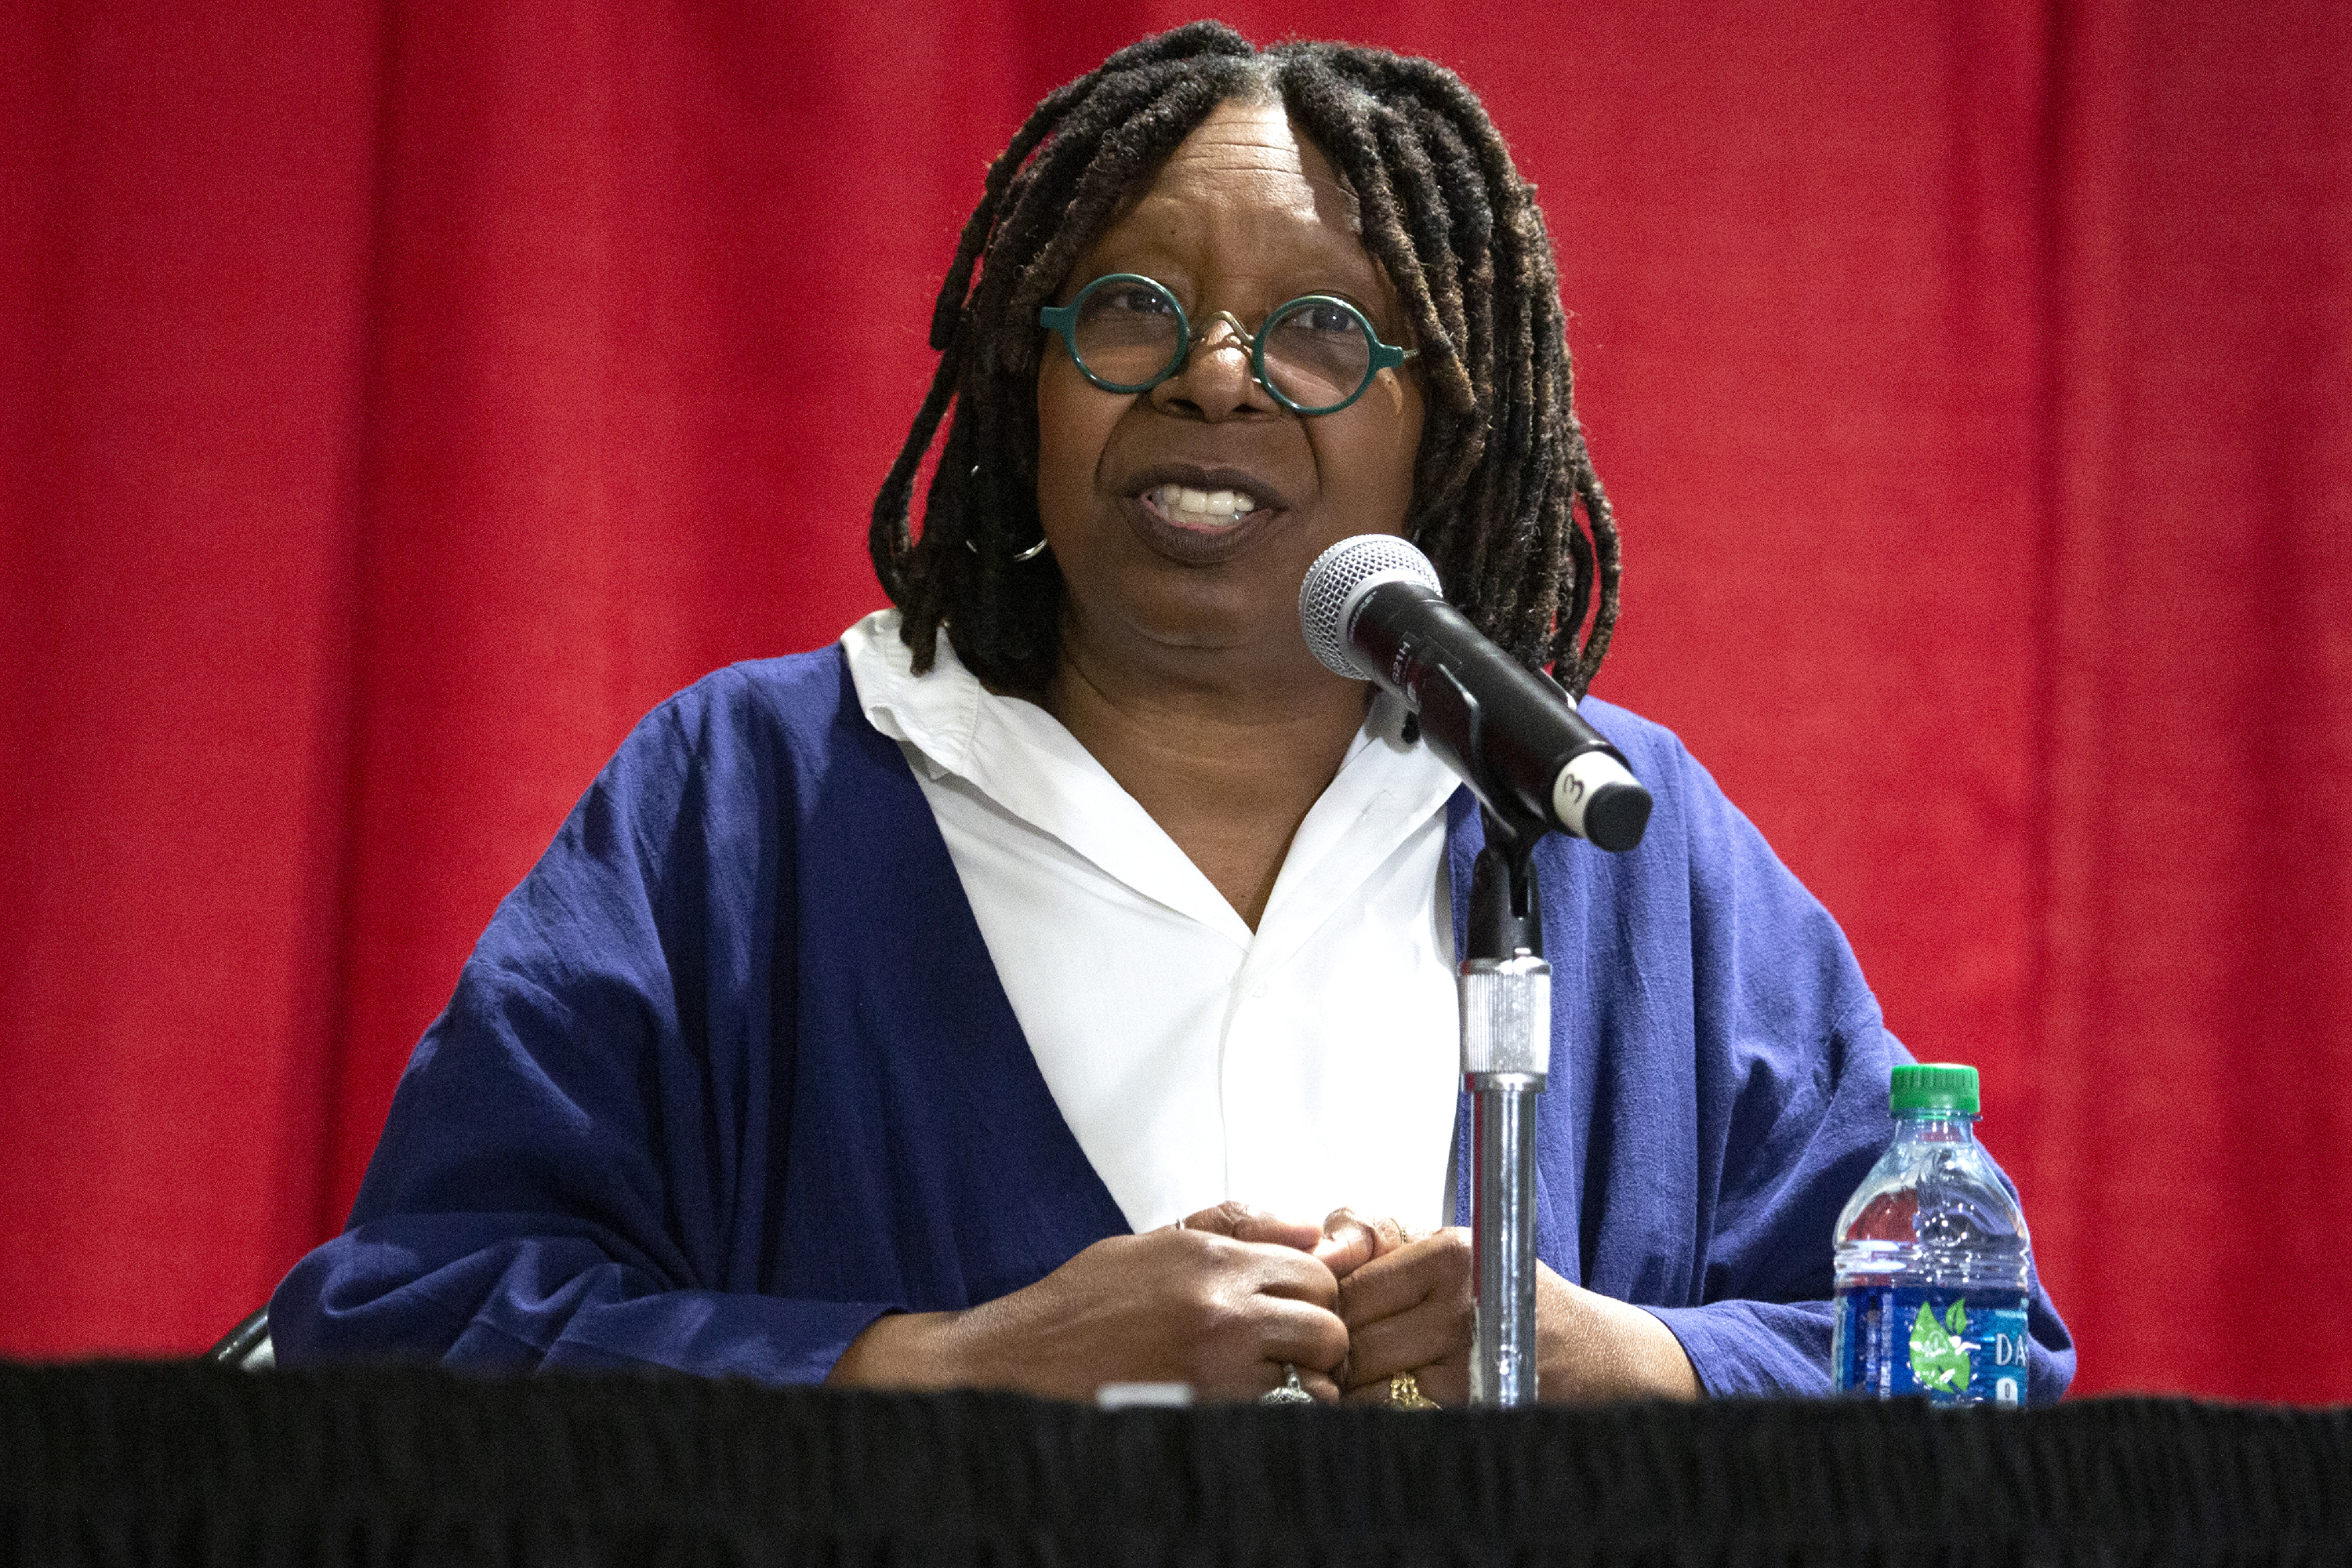 Whoopi Goldberg sitting onstage speaking into a microphone